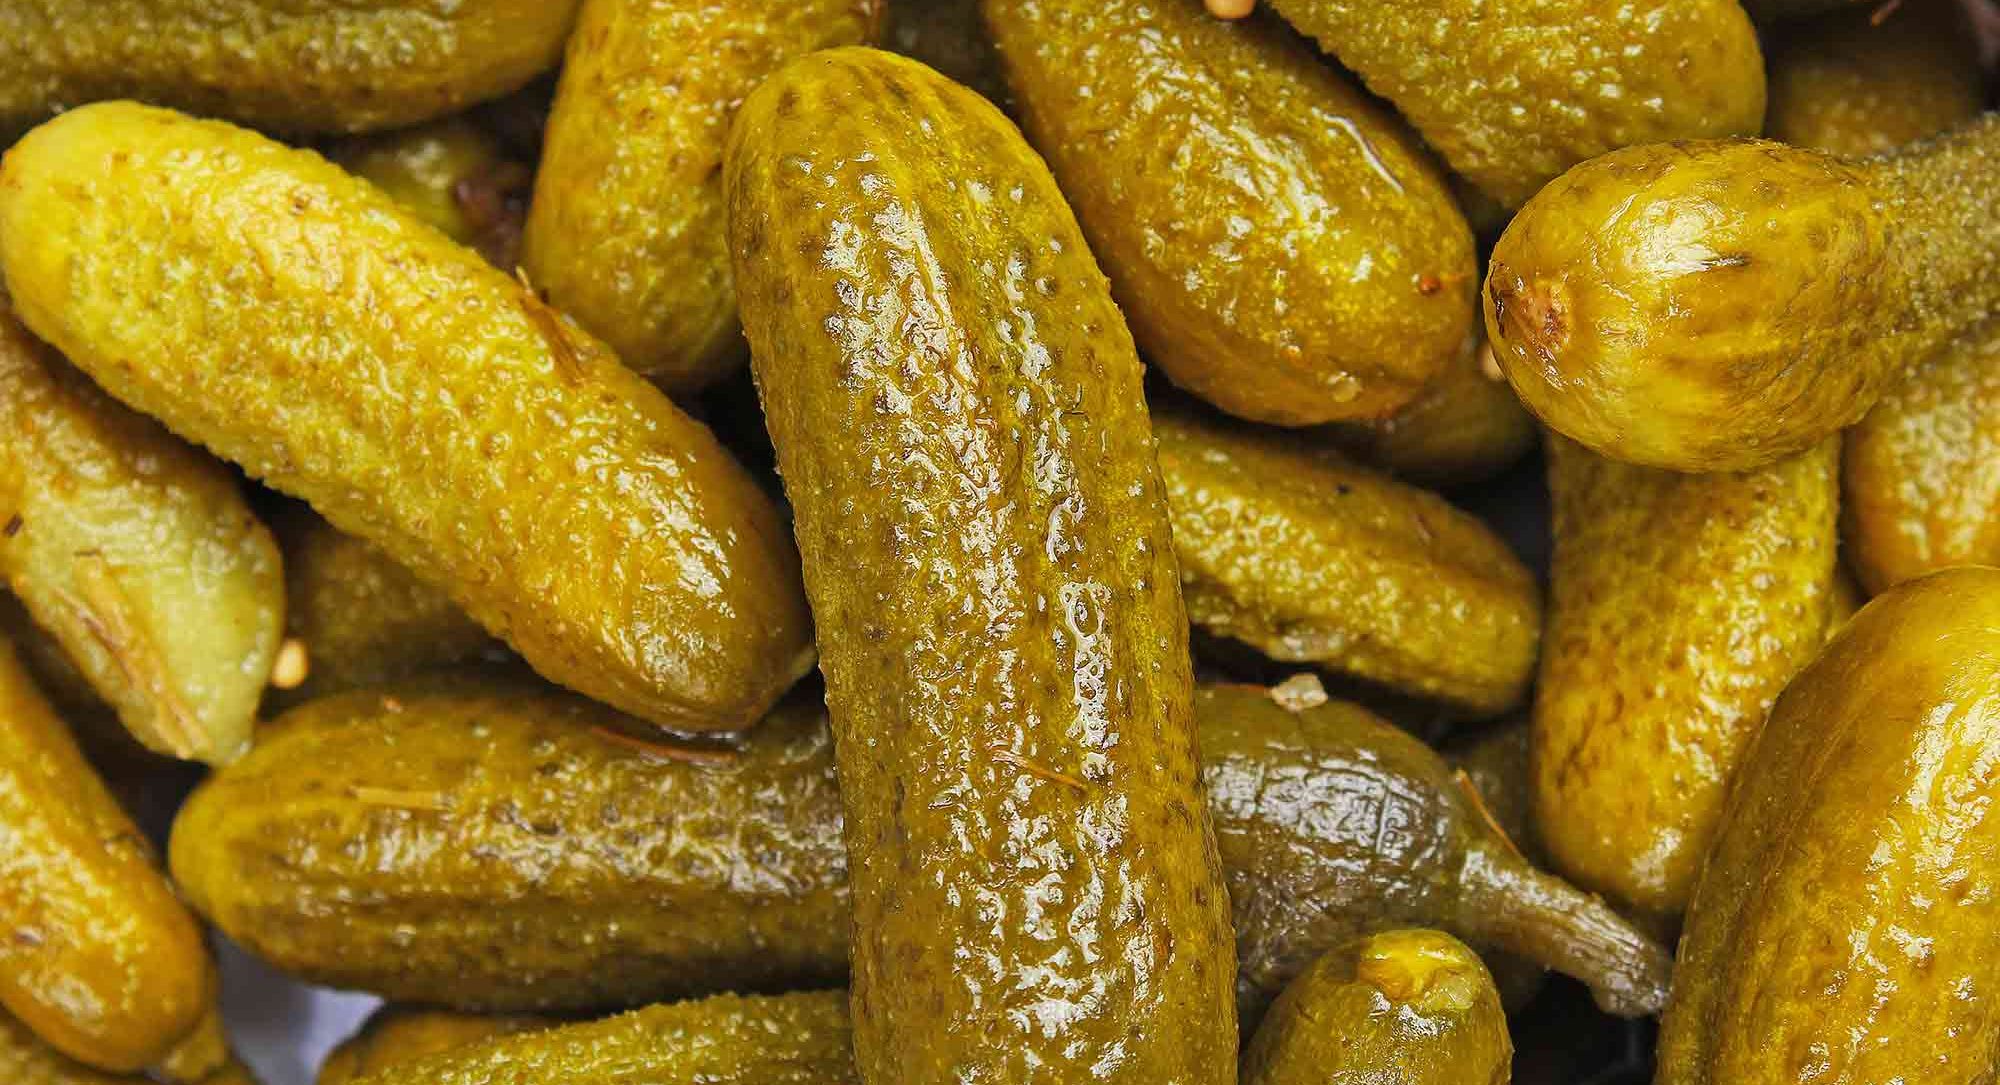 Pickles can help to reduce the level of cavity-producing bacteria and lead to better oral health, it has been suggested